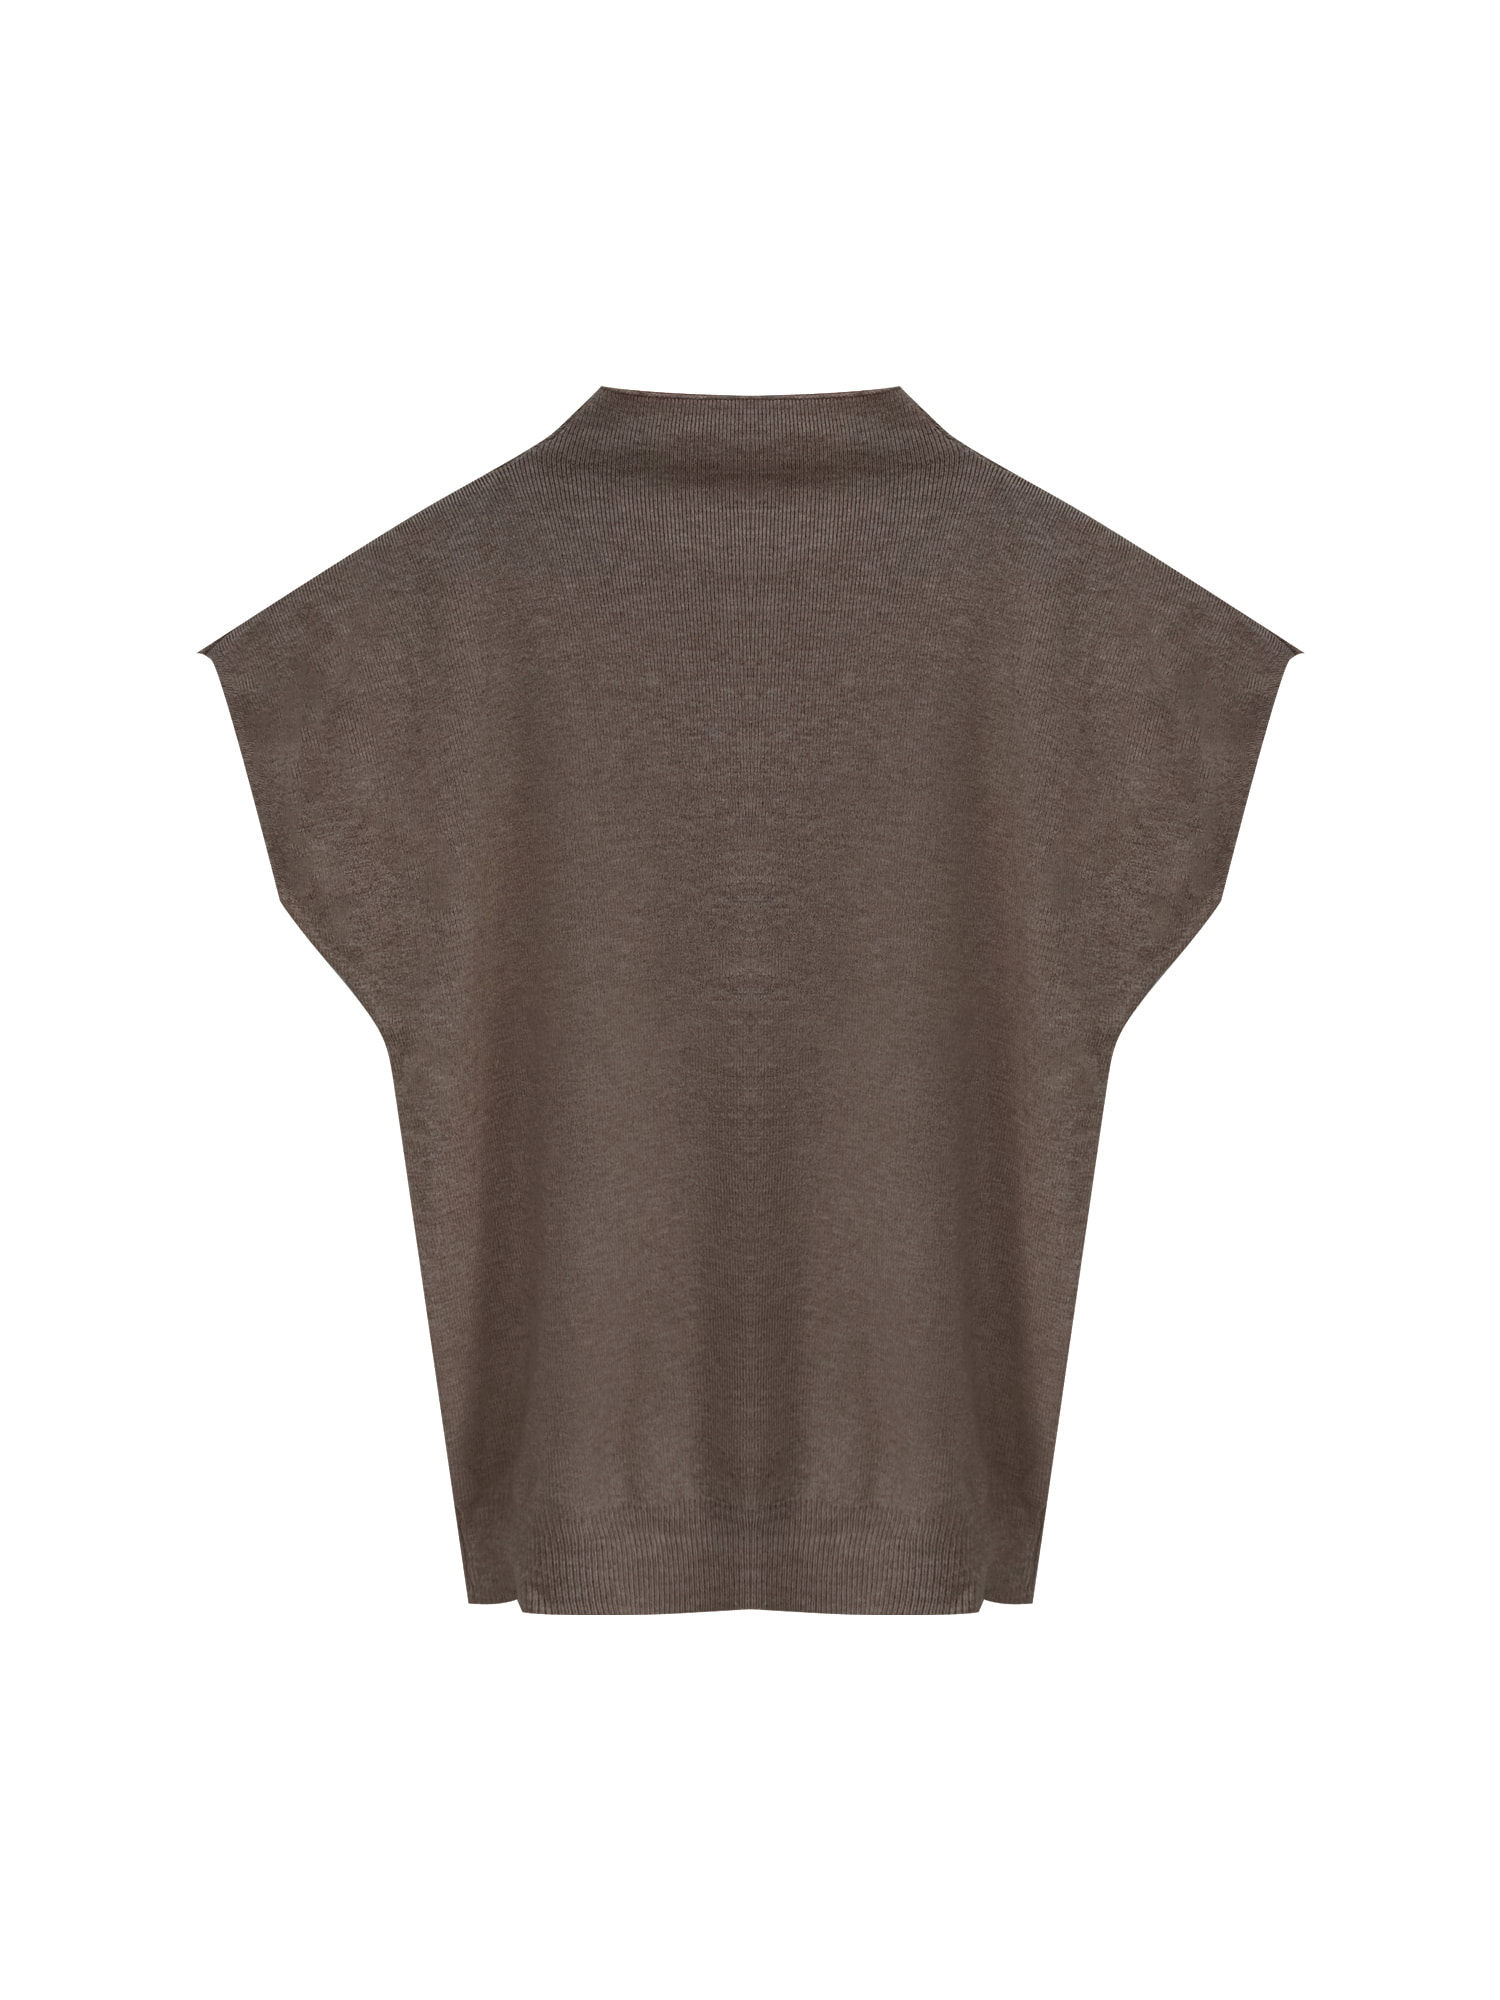 cashmere knit _ brown